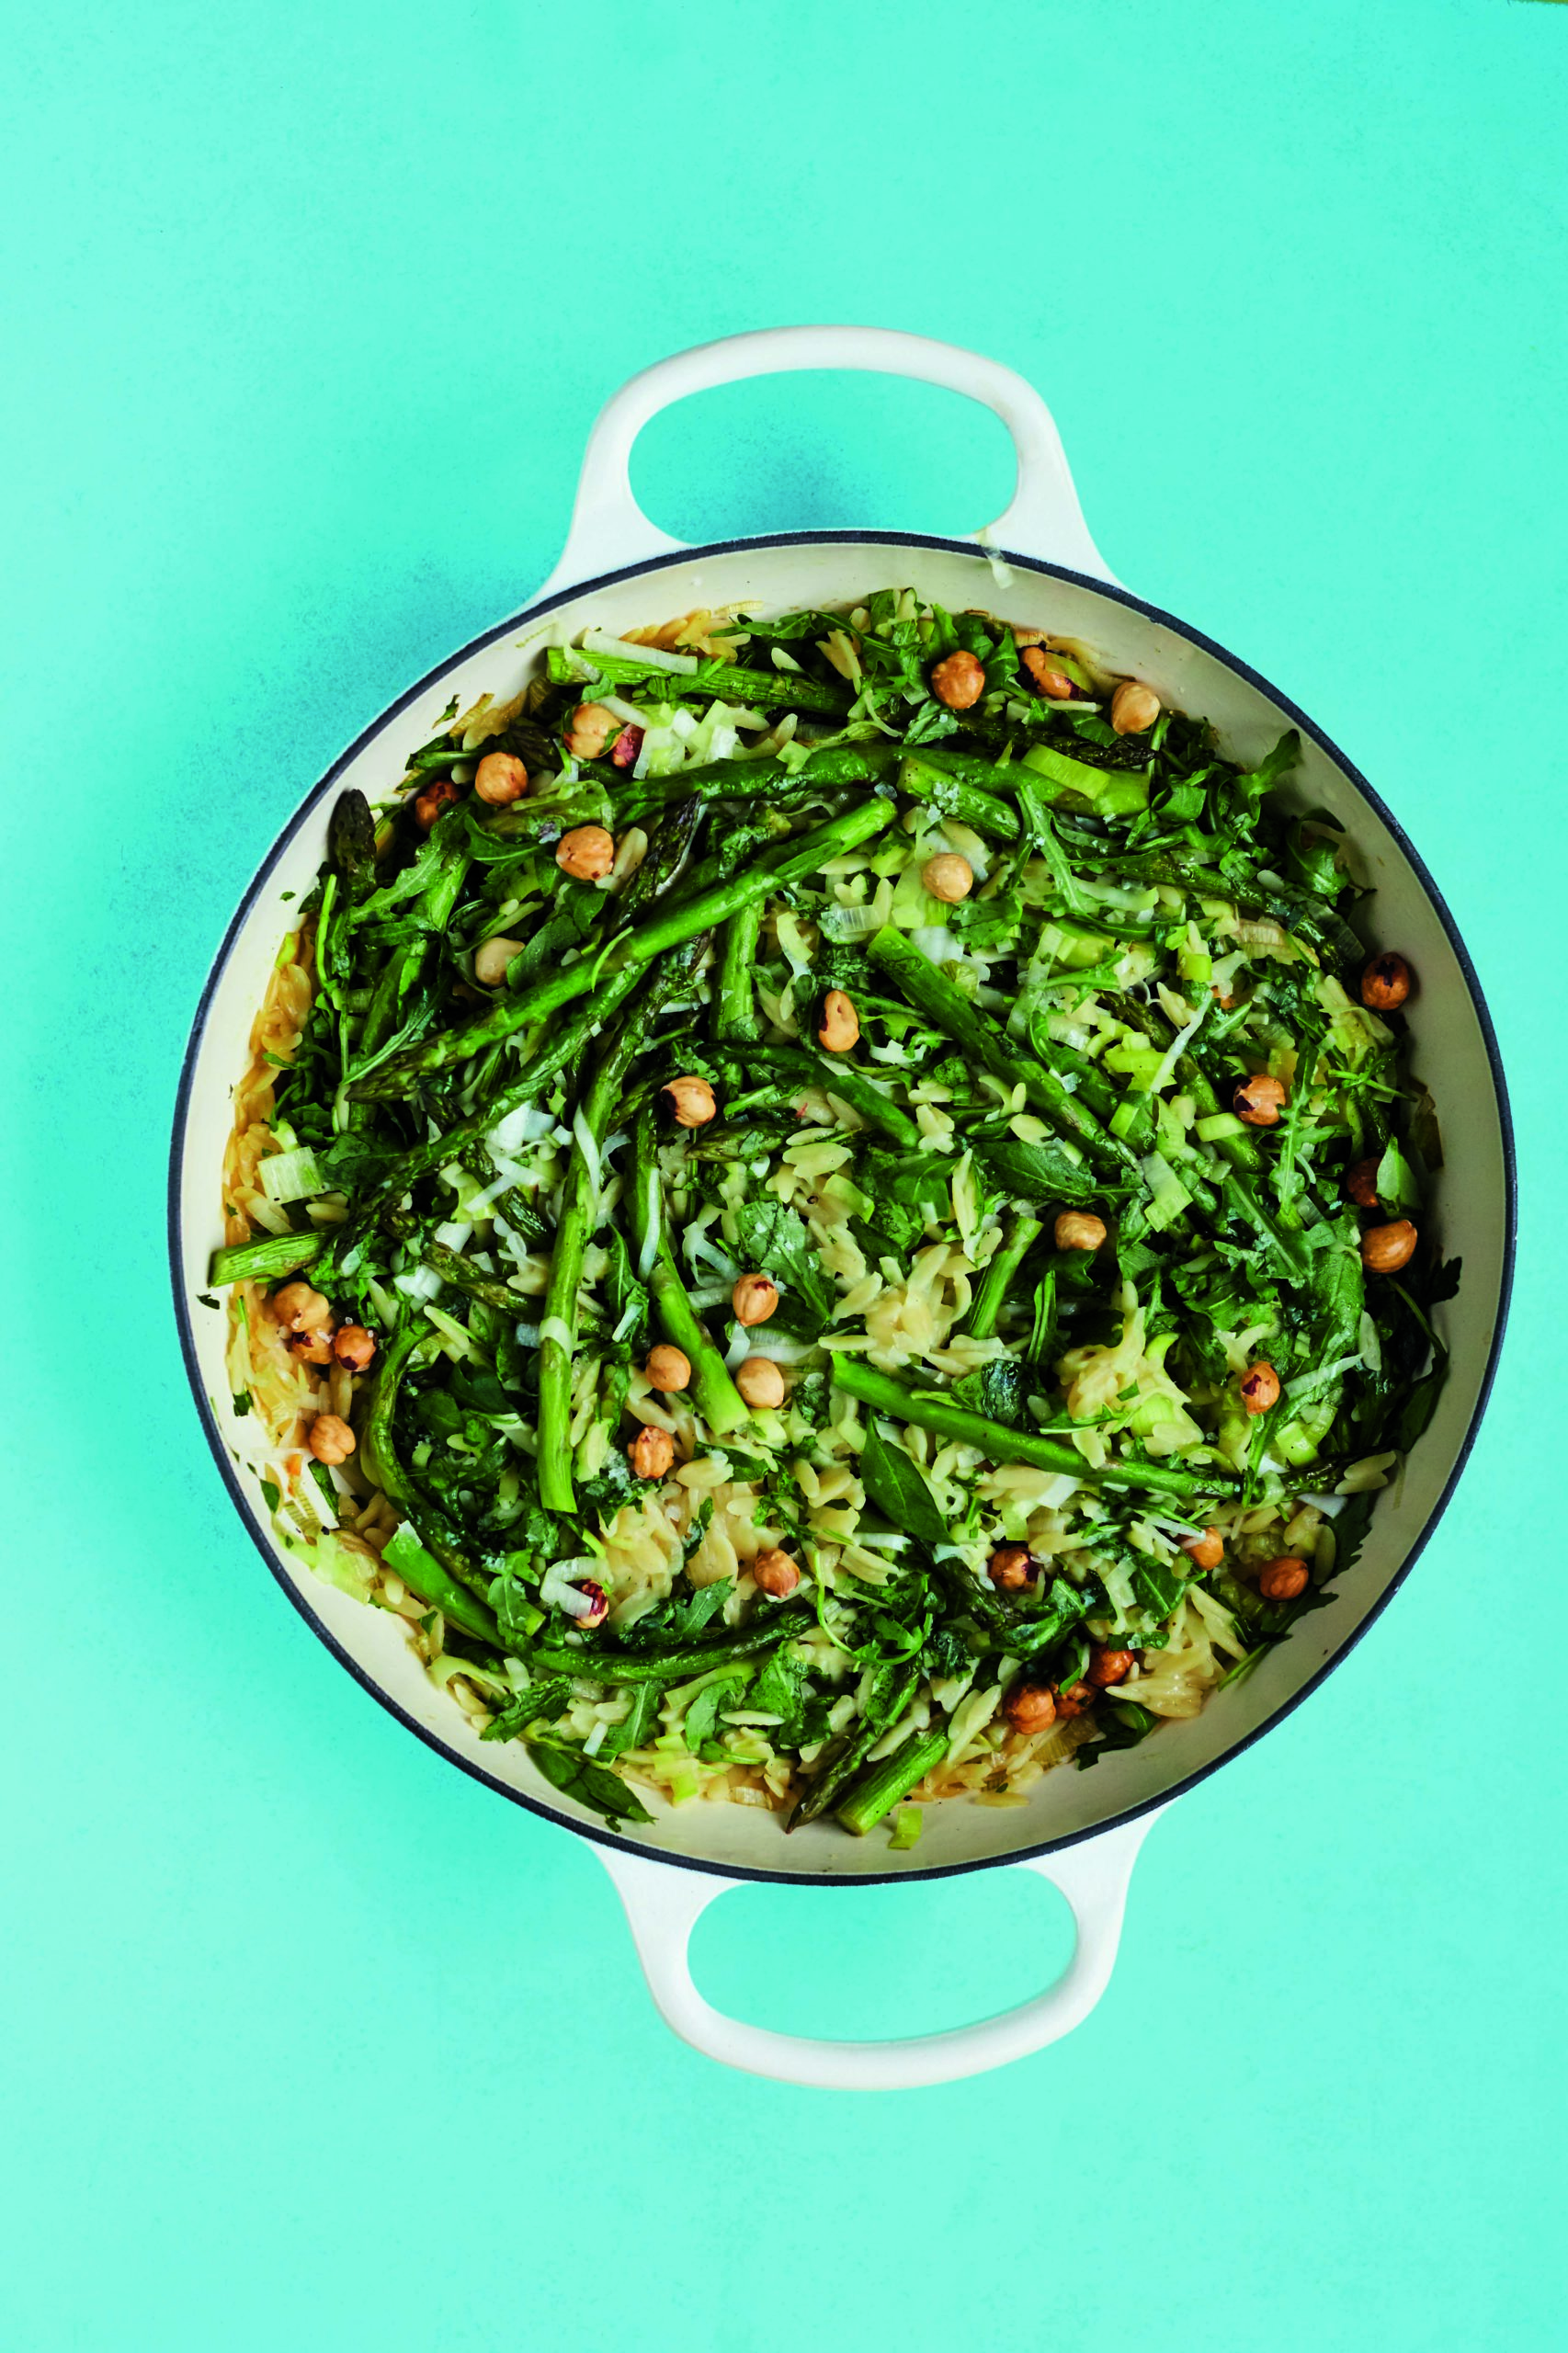 Quick Cook Leek Orzotto With Asparagus, Hazelnuts and Rocket